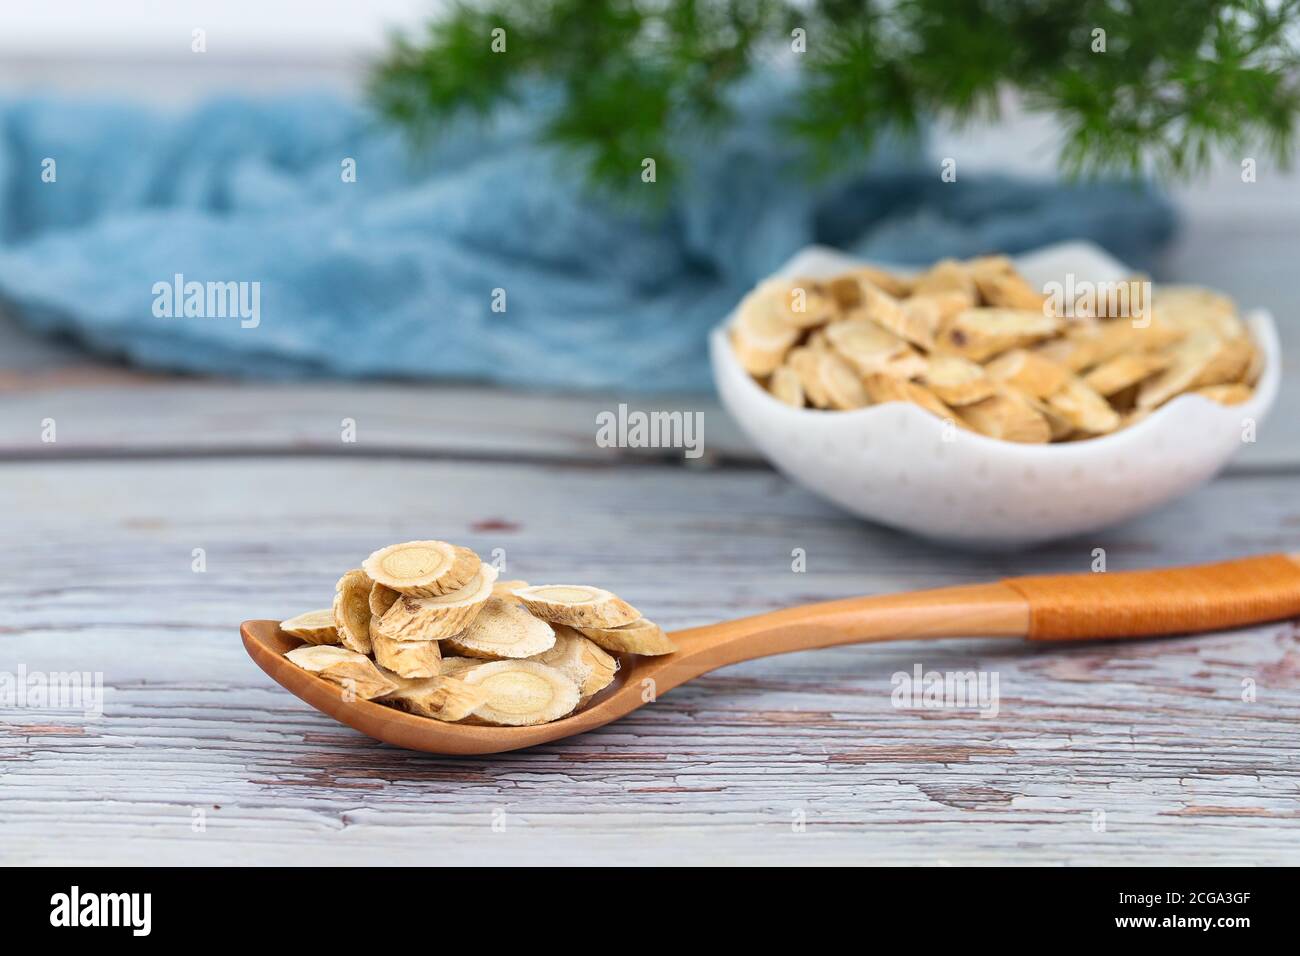 Traditional Chinese medicine astragalus Stock Photo